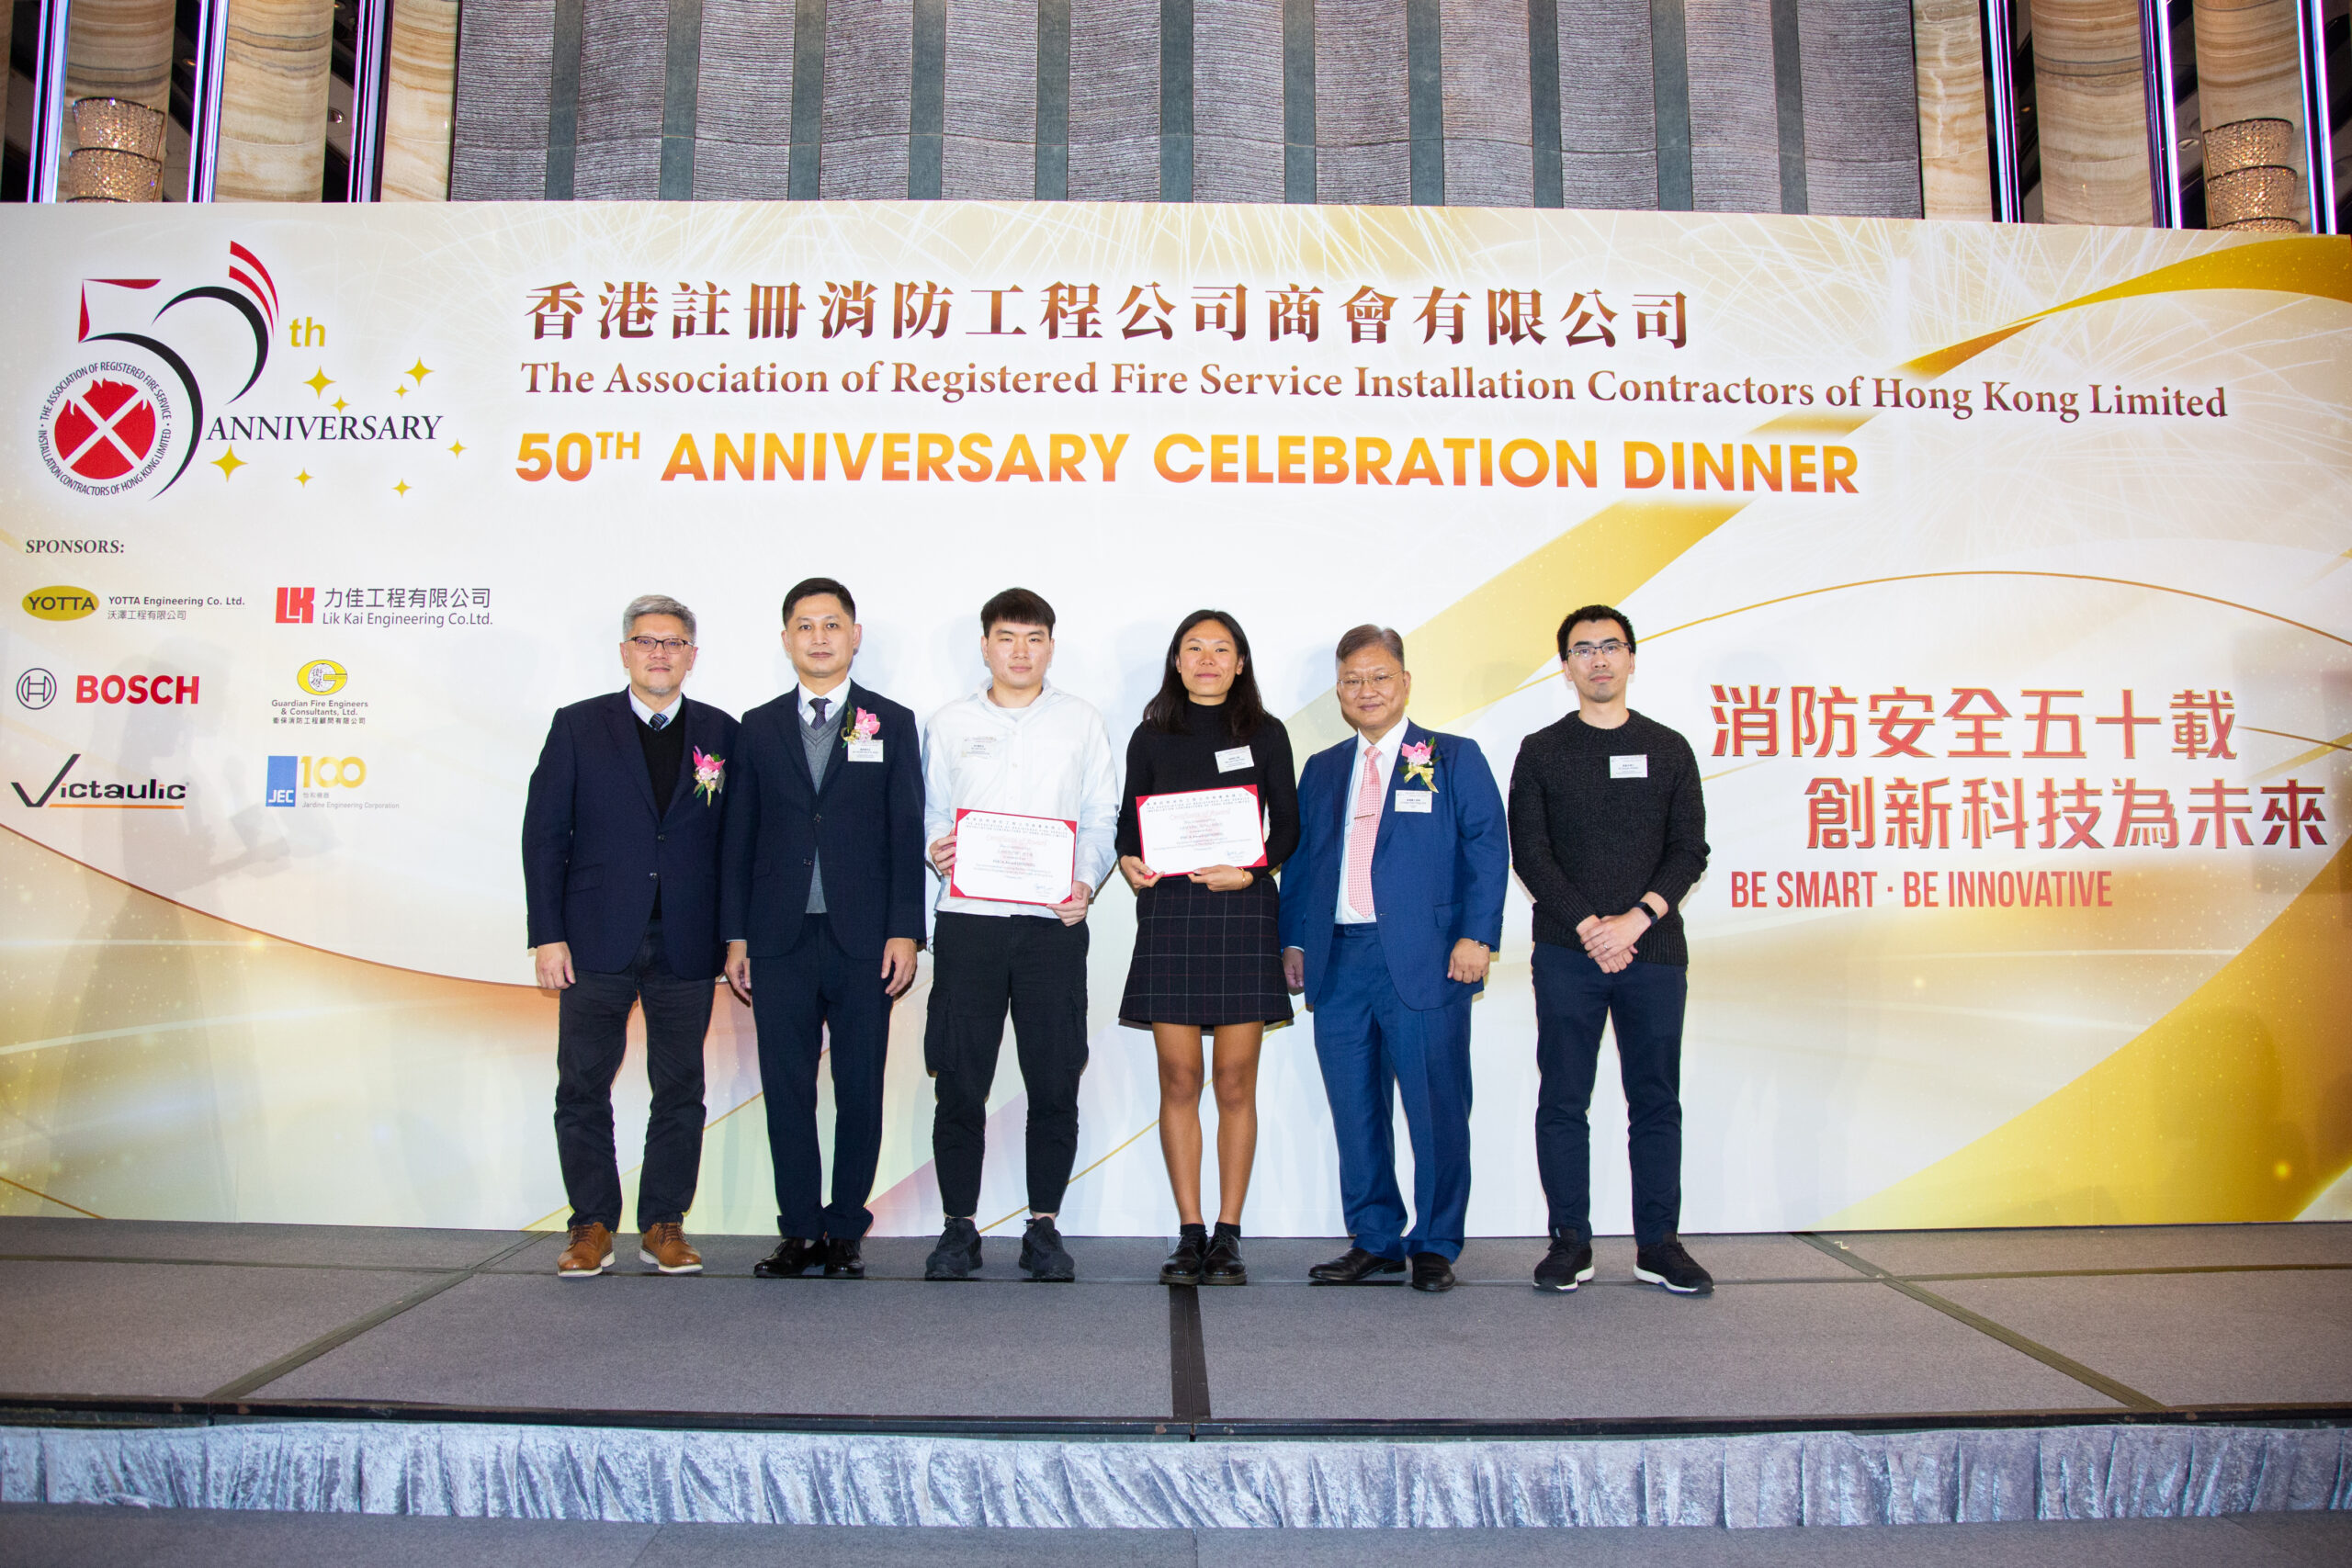 0501 Scaled - Fsica 50th Anniversary Dinner 50周年晚宴 - Thank You For All Support To The Fsica And We Look Forward To Seeing You At The Forthcoming Events.